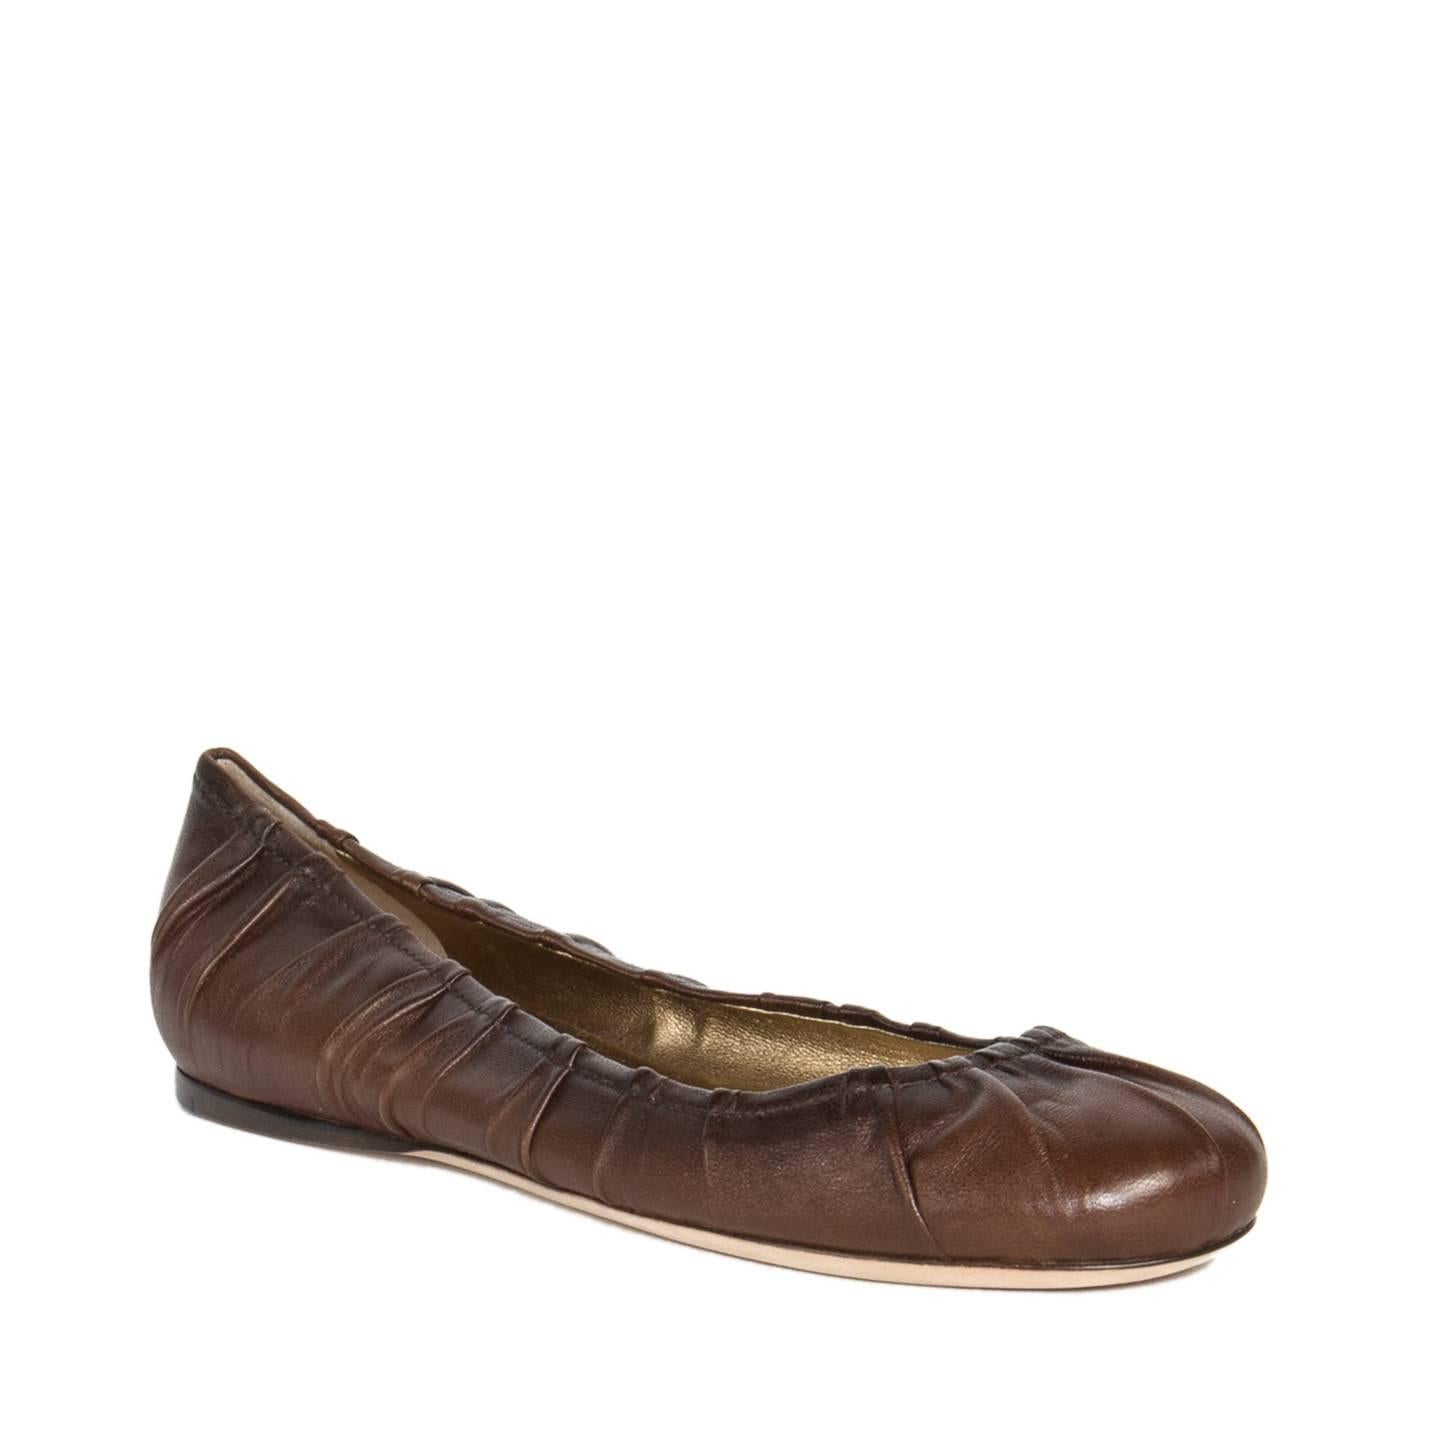 Prada Brown leather ballet flats with round toe, a dark shading around the edge and an interesting pleats detail. Vero Cuoio. Made in Italy.

Size  40 Italian sizing

Condition  Excellent: Never worn